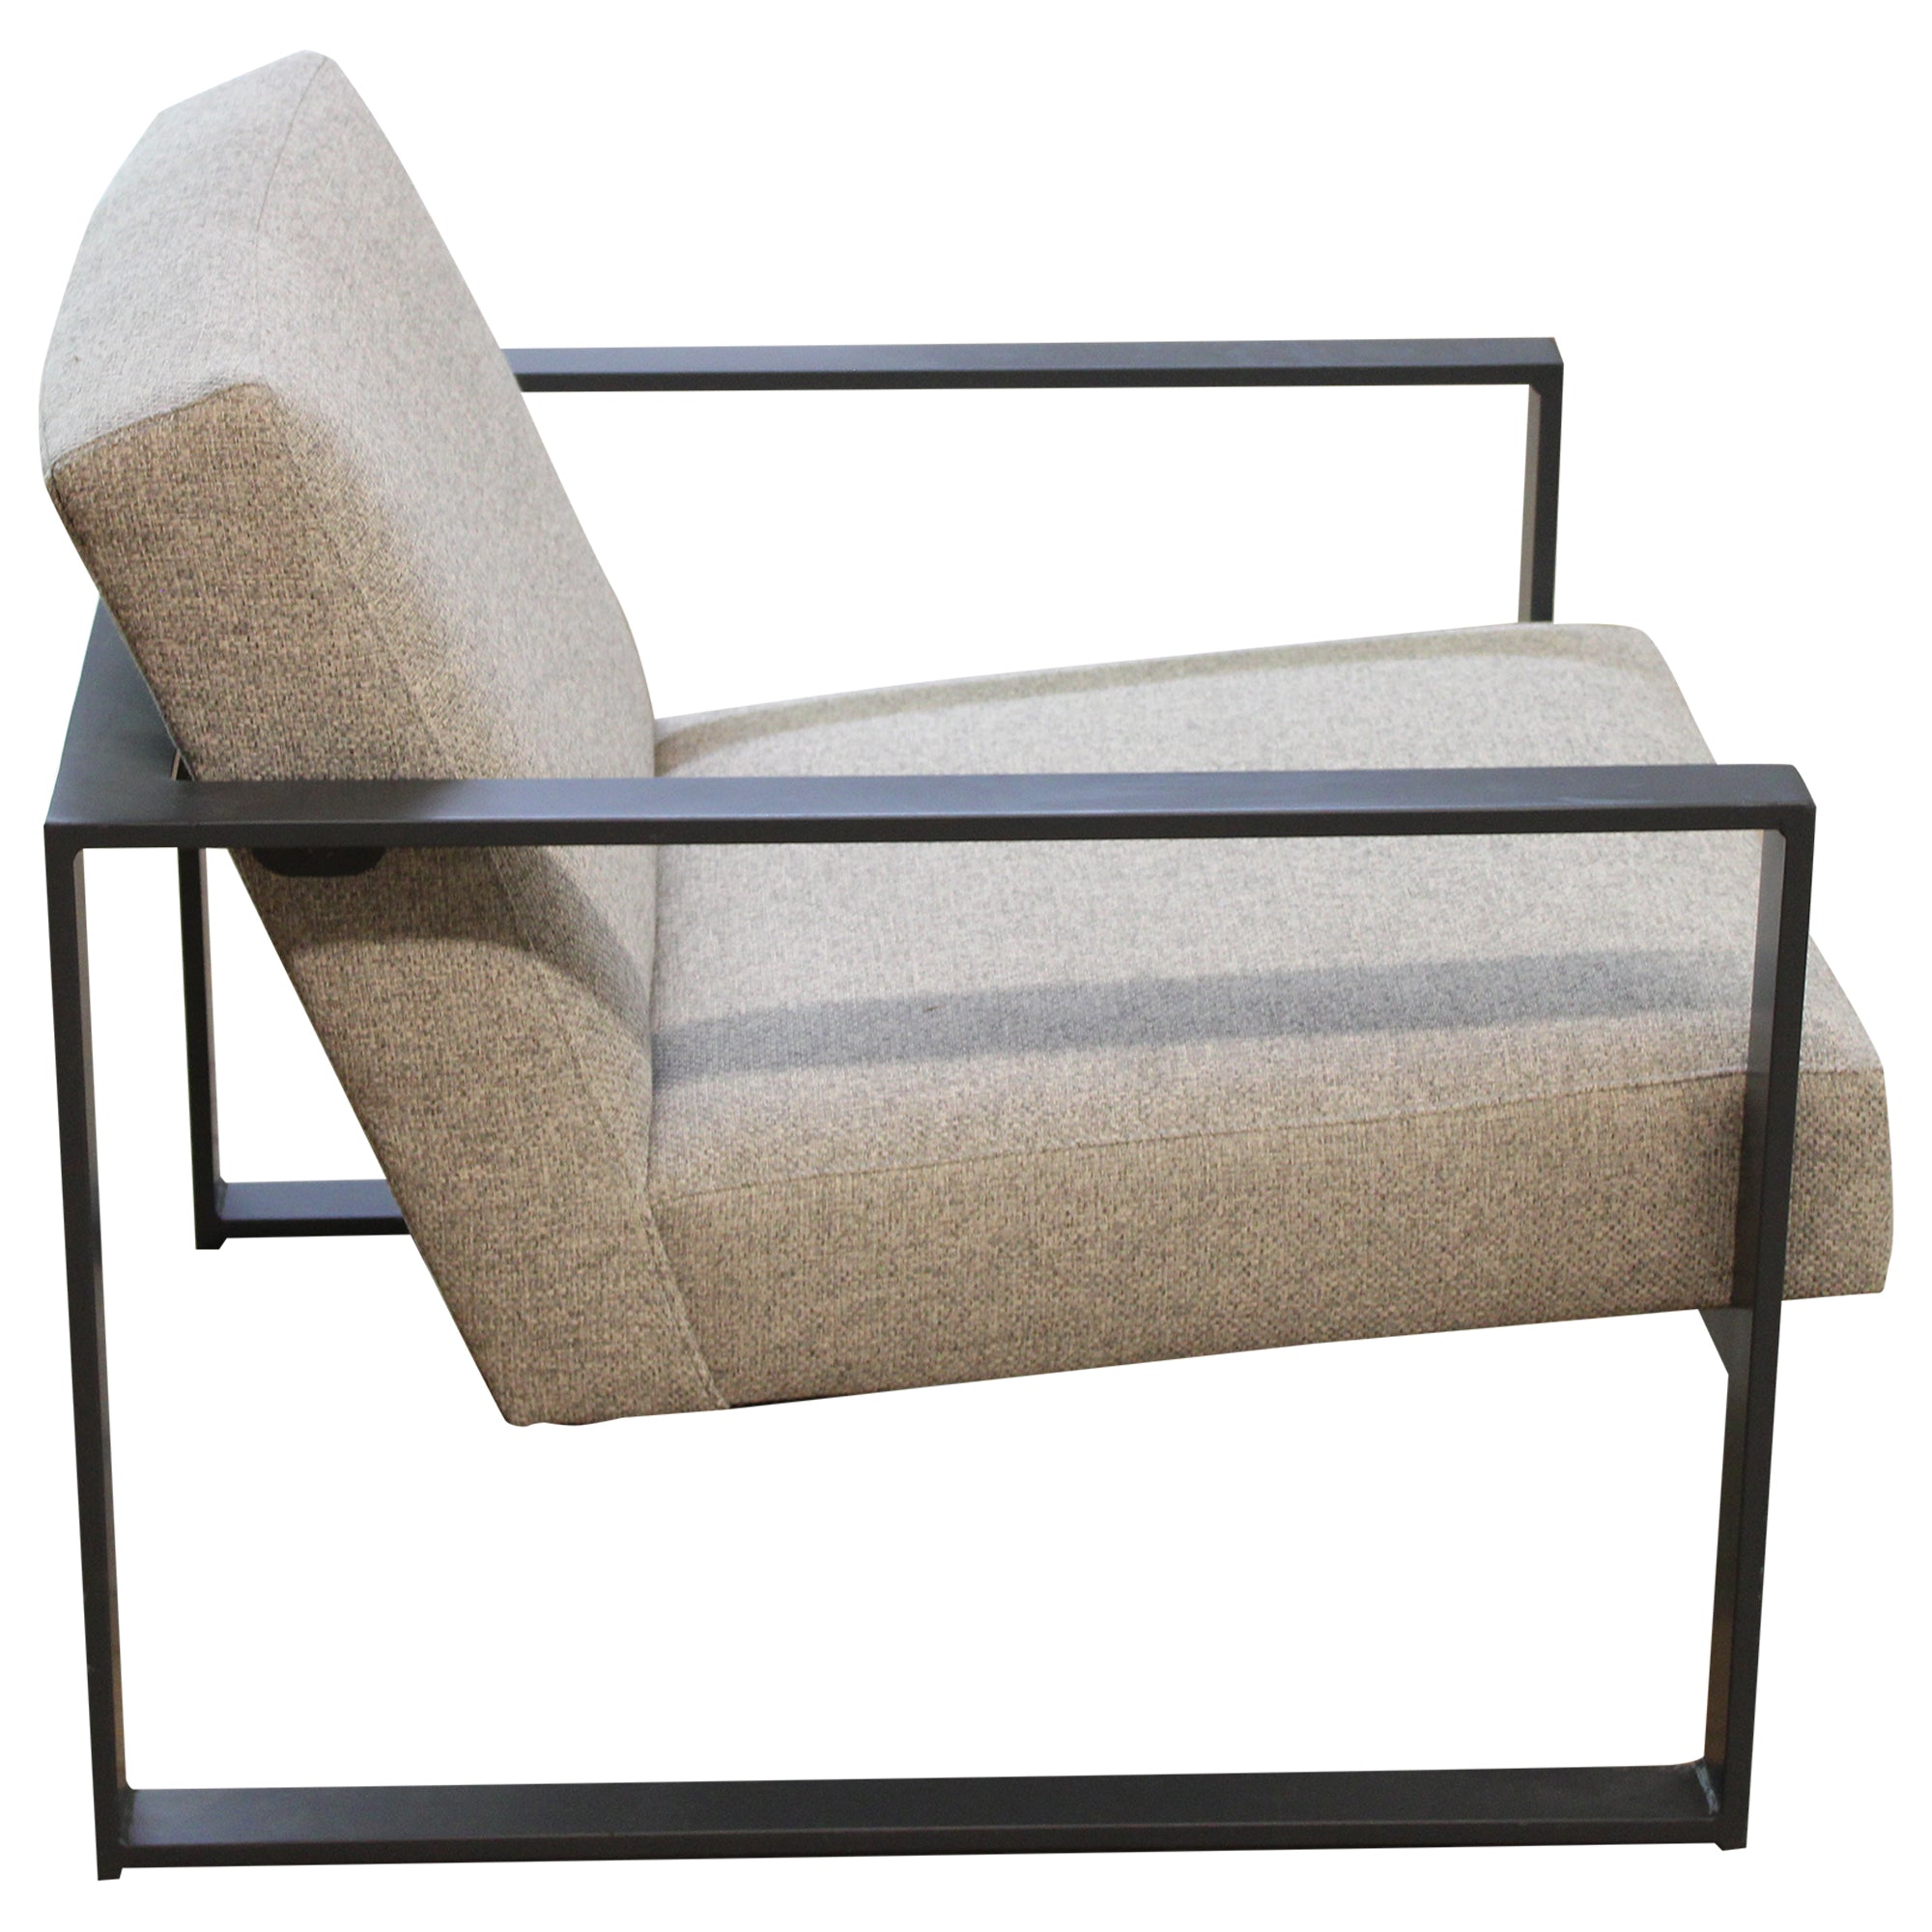 CB2 Lounge Chair - Preowned